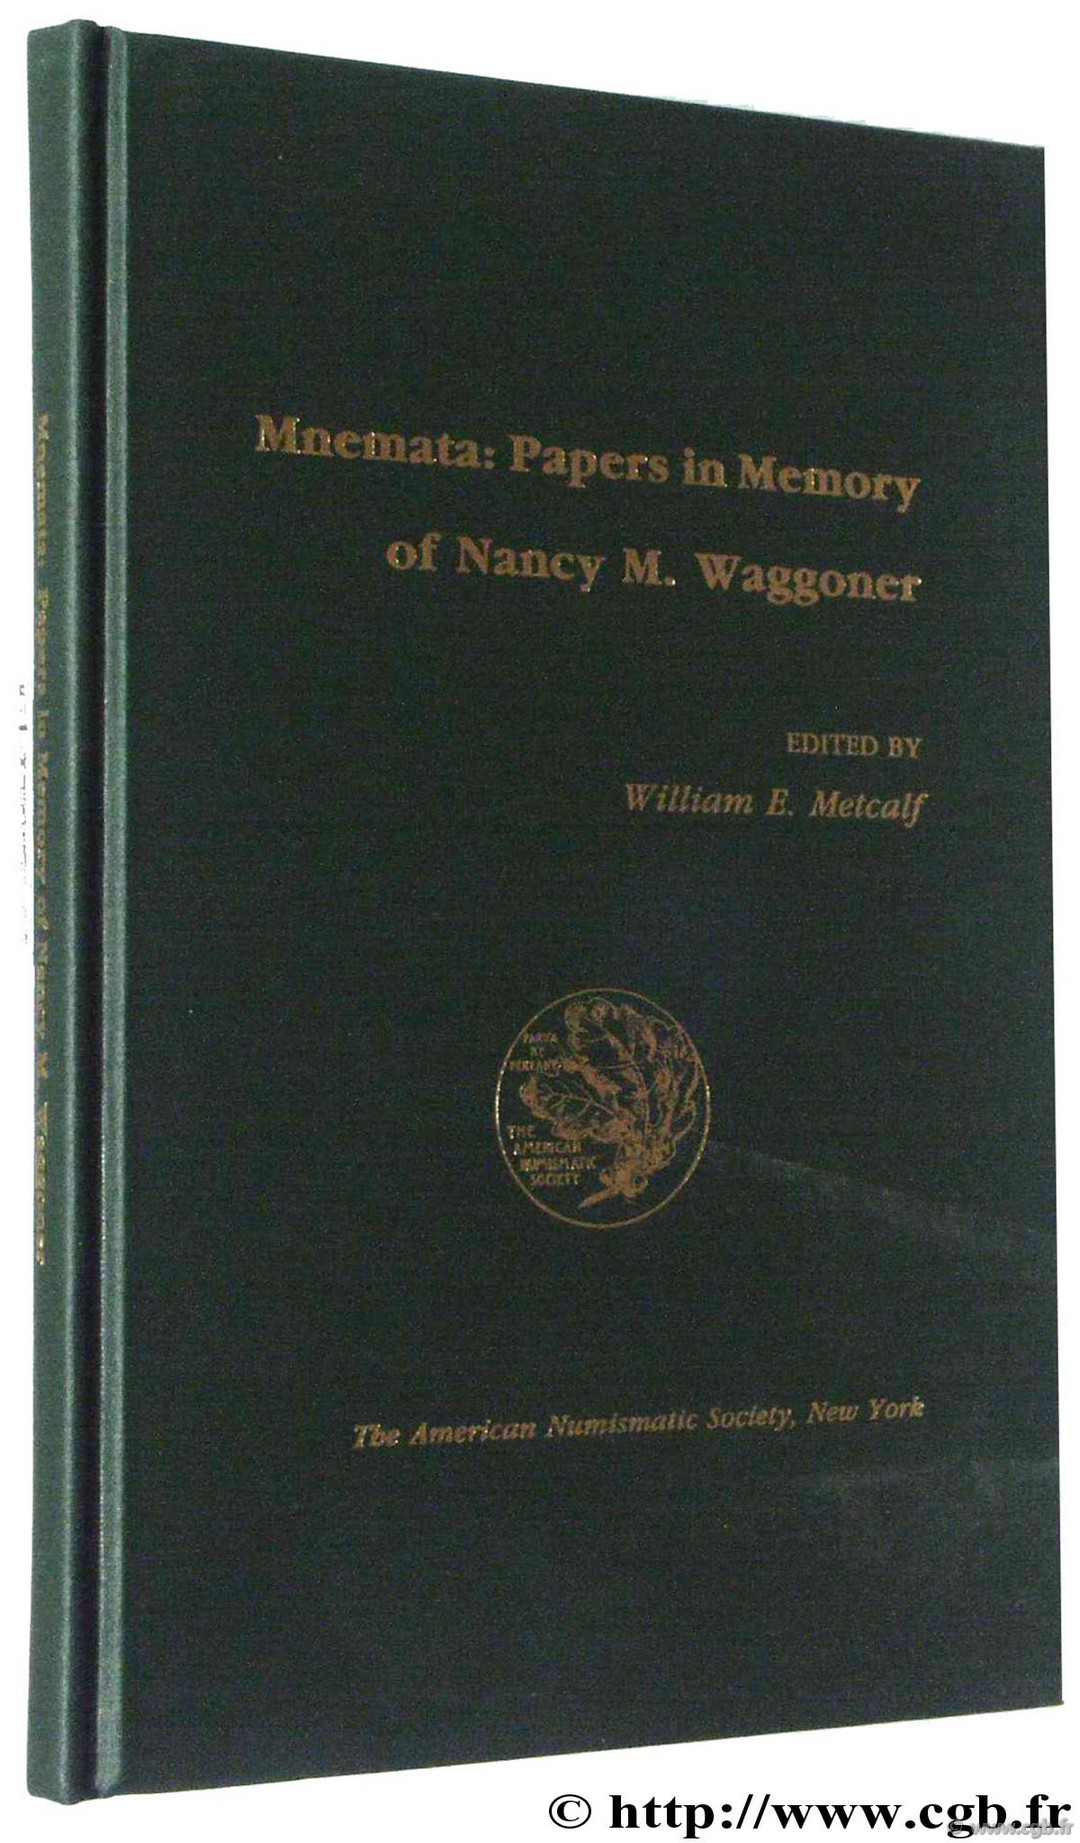 Mnemata : Papers in Memory of Nancy M. Waggoner, American Numismatic Society Divers